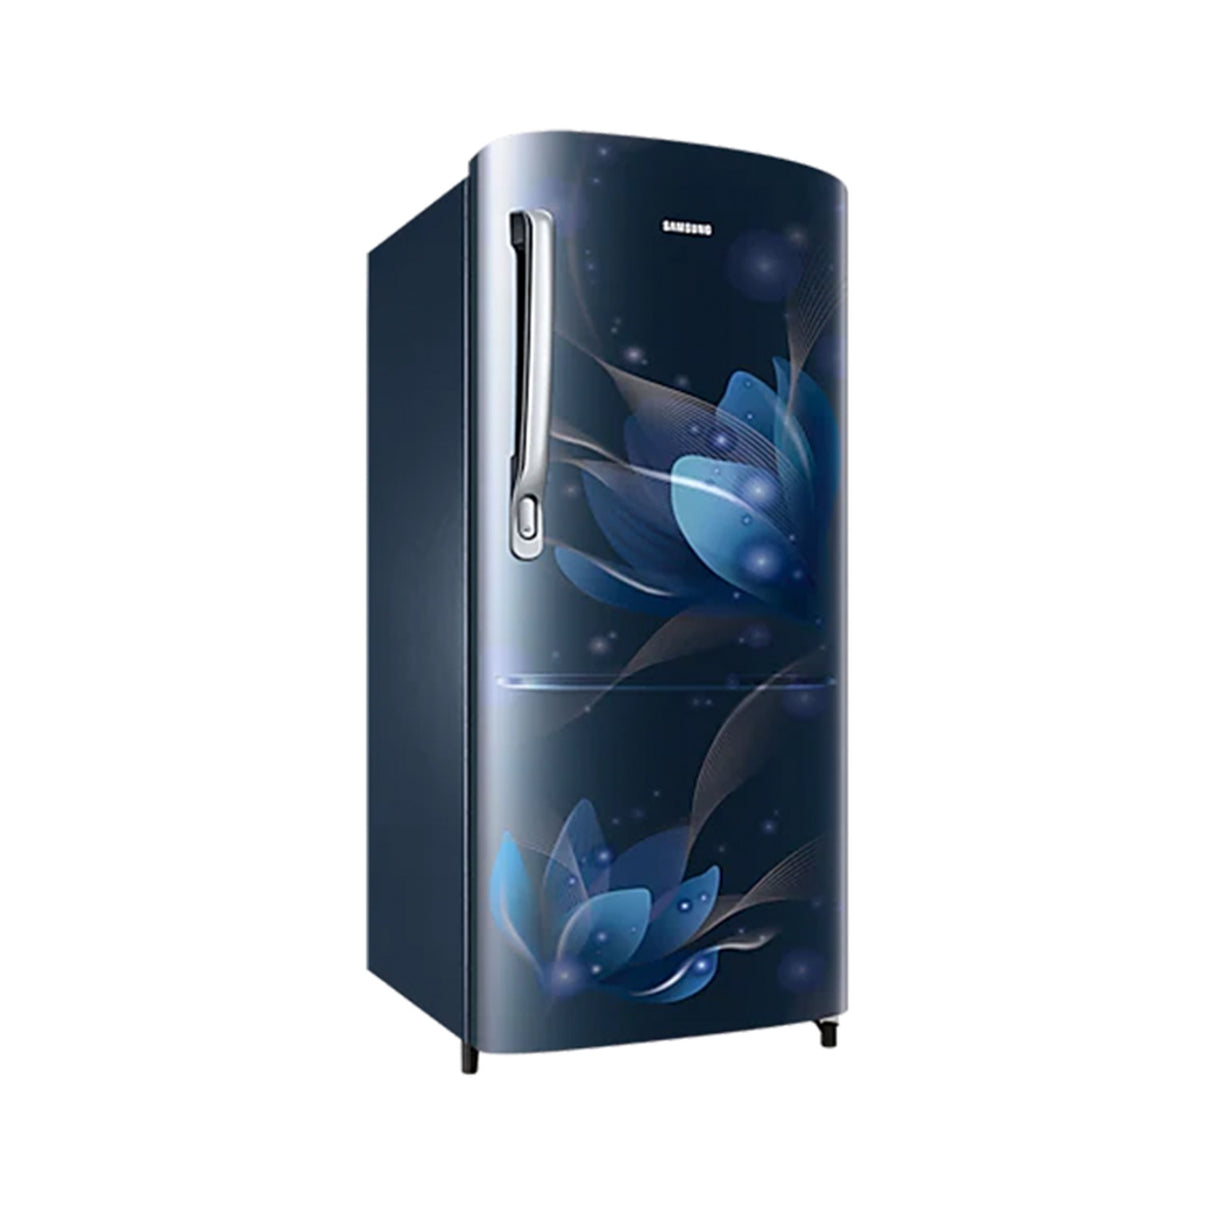 Upgrade in style with Samsung's 183L Single Door Fridge and its chic Grande Design.